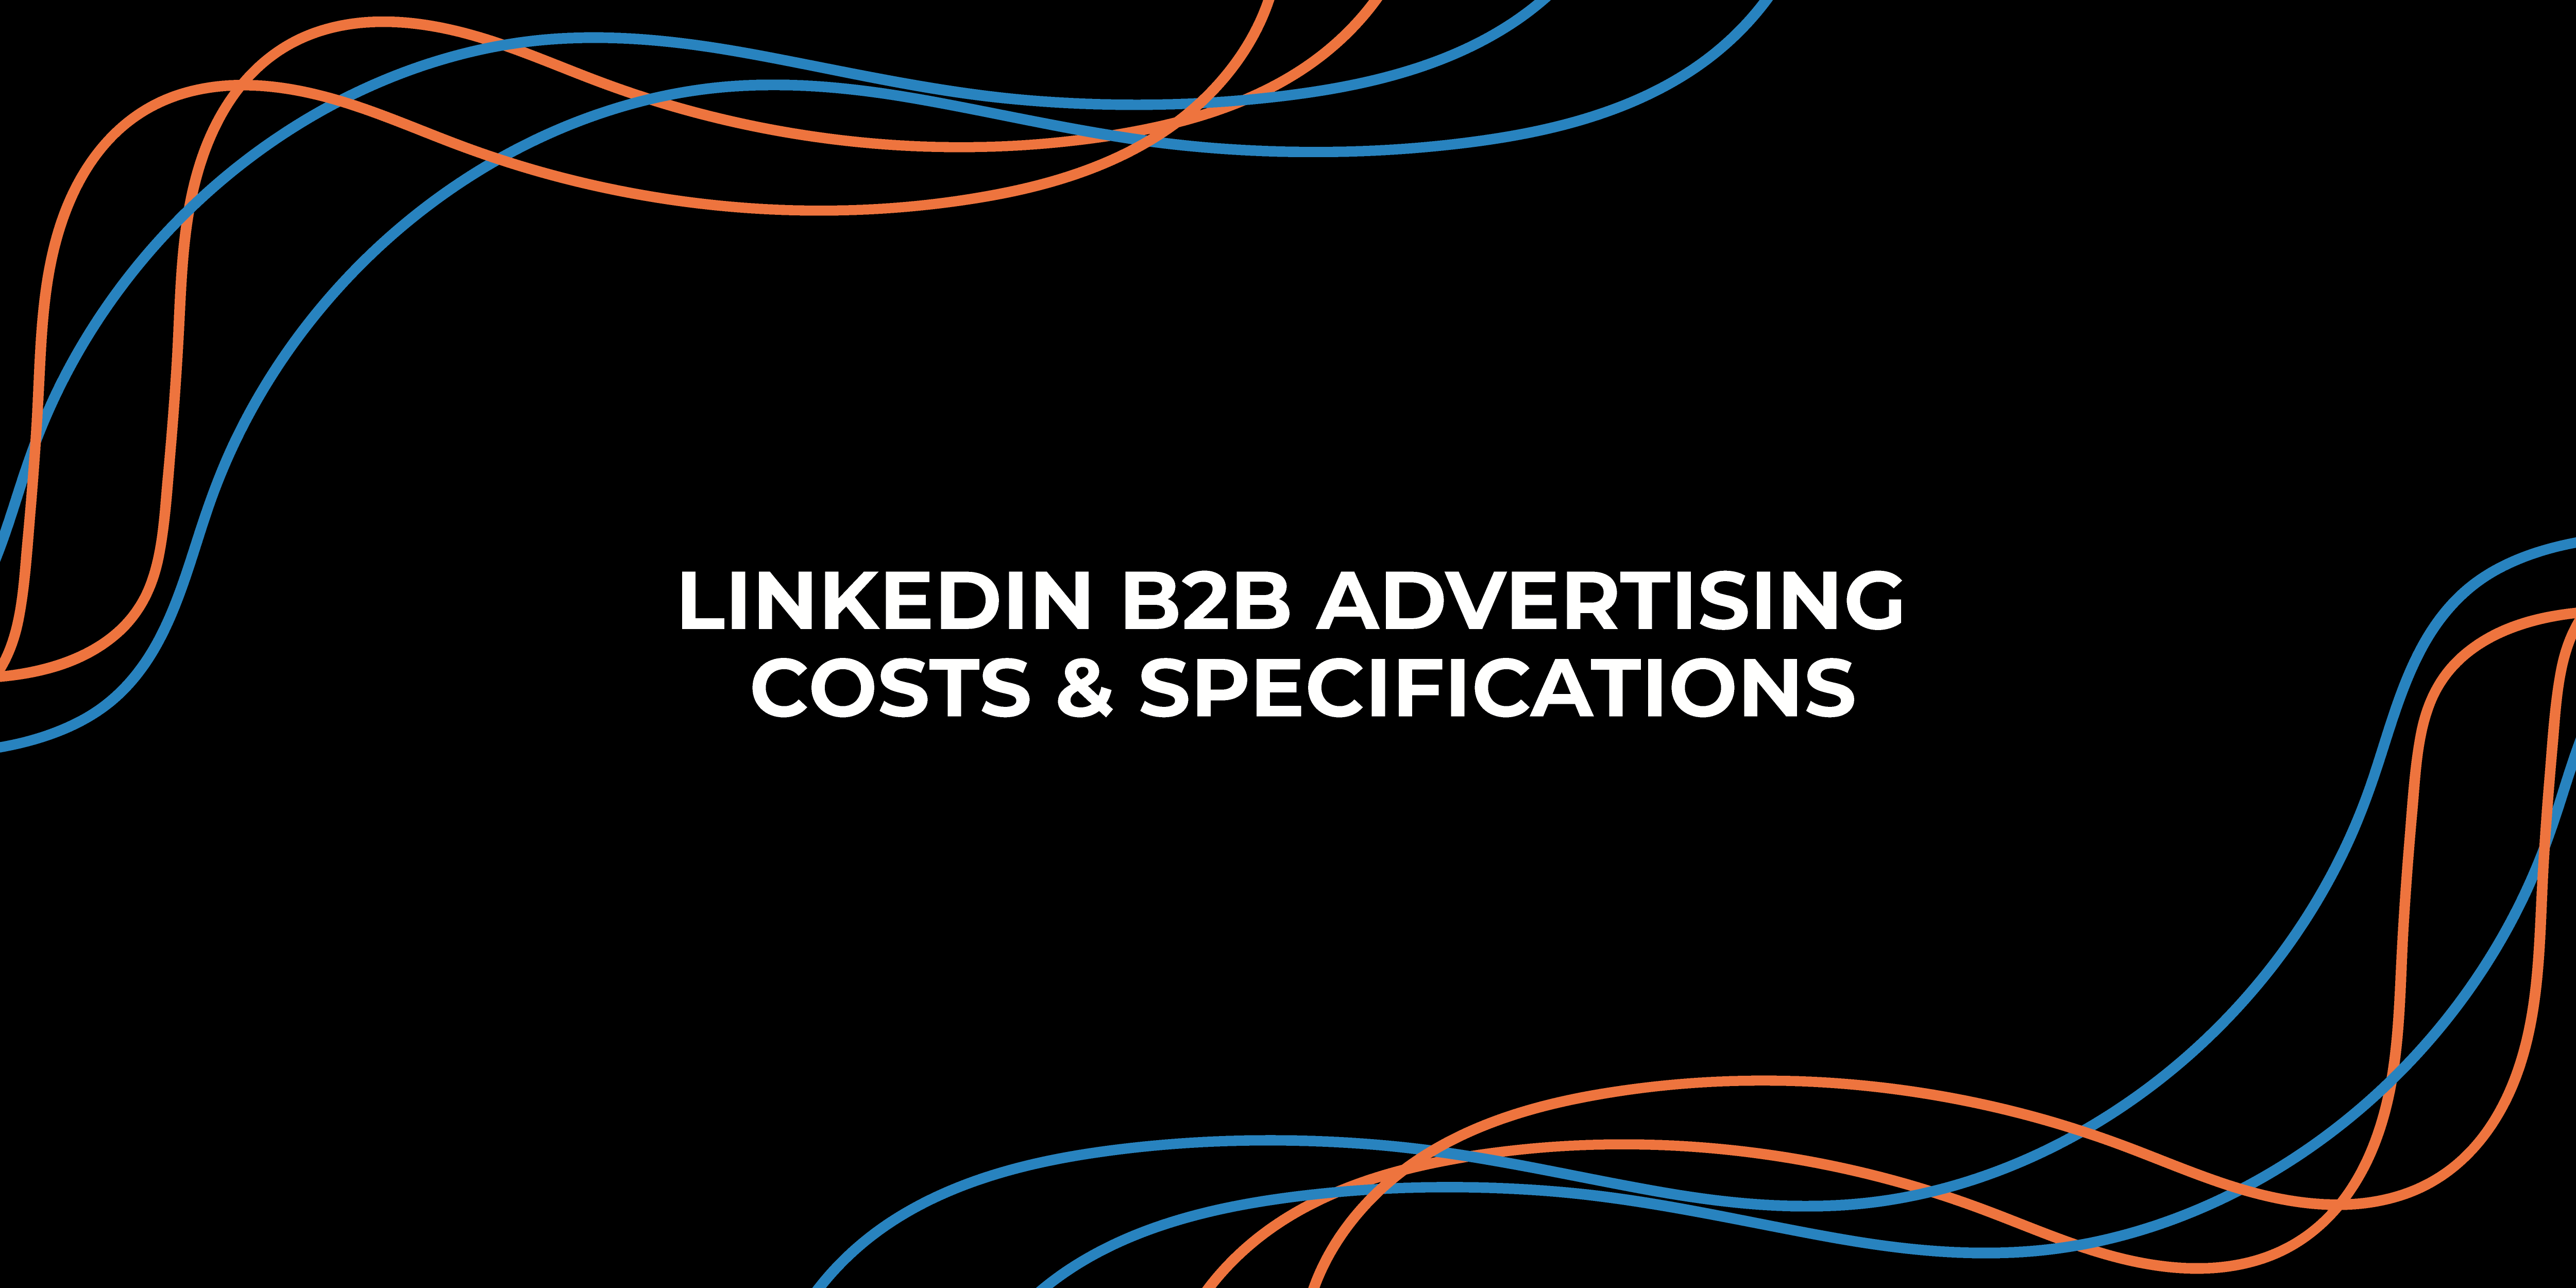 LinkedIn B2B Advertising Costs & Specifications